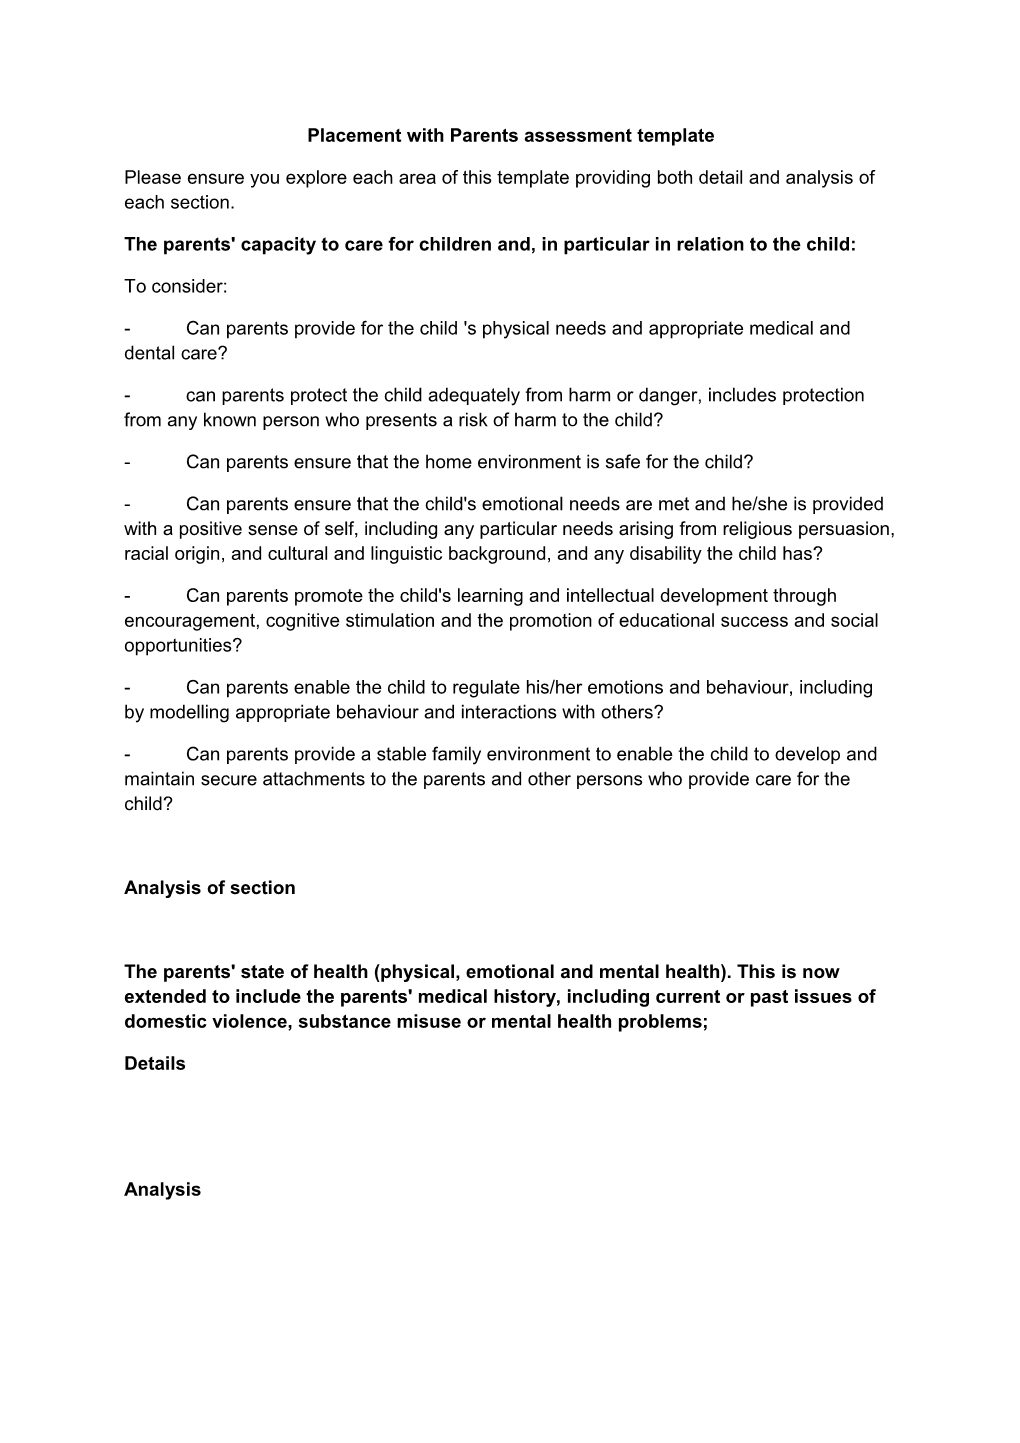 Placement with Parents Assessment Template